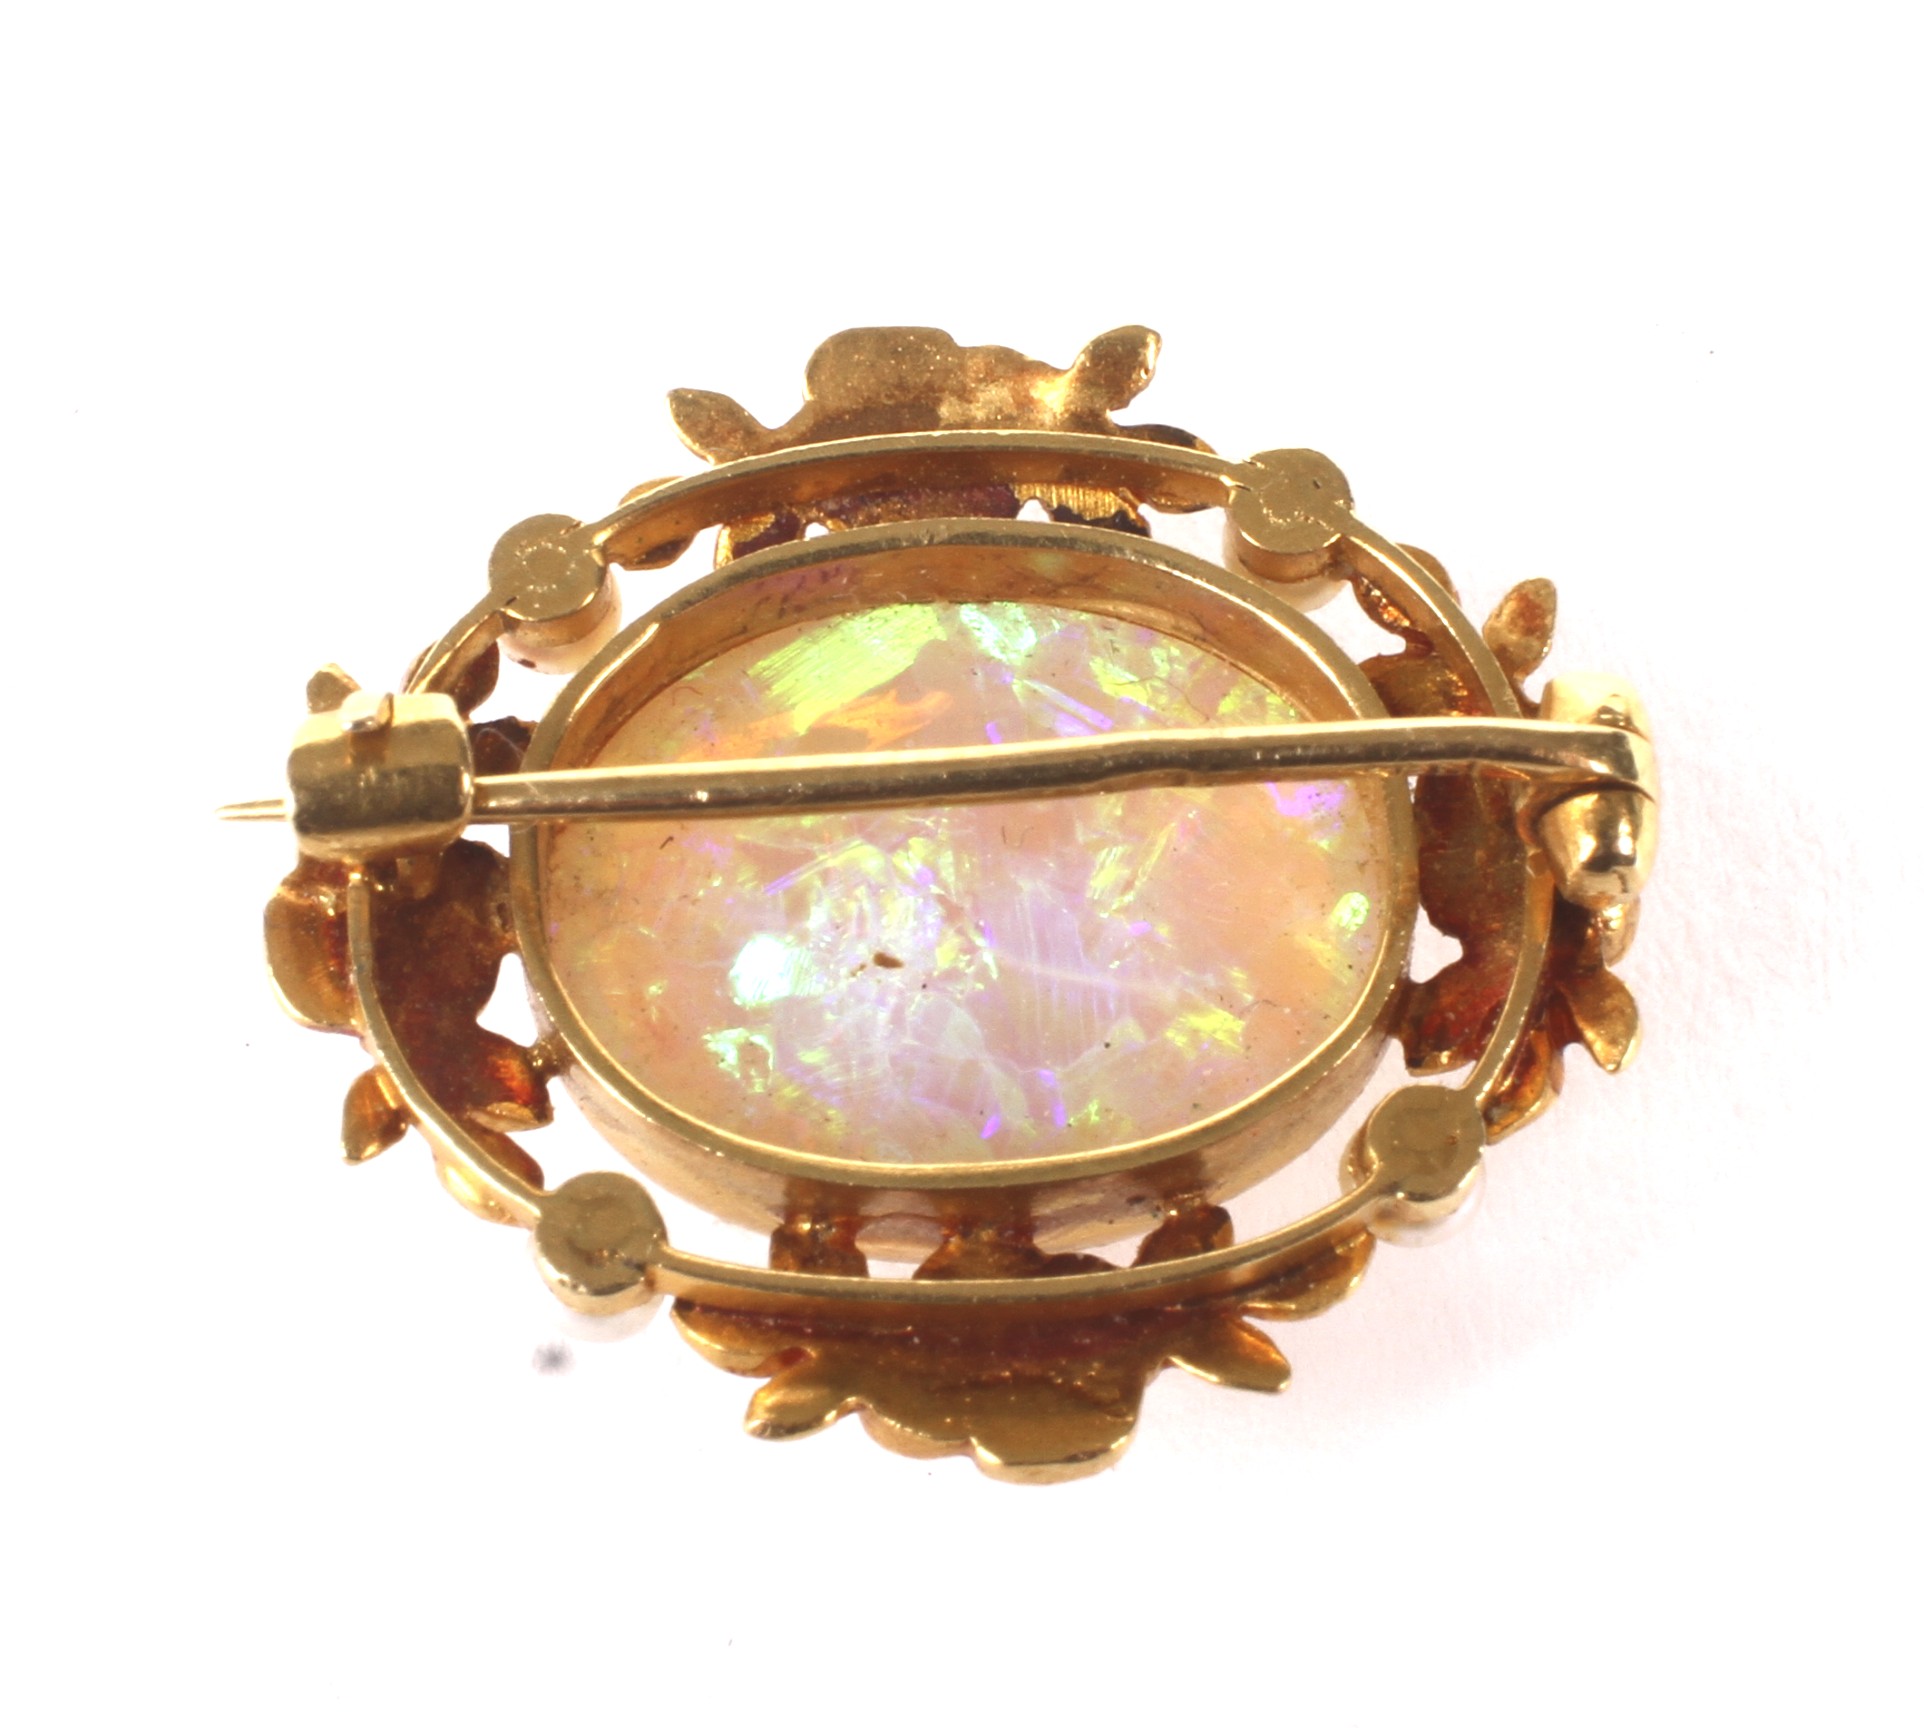 An early 20th century Continental gold, opal and seed-pearl brooch. - Image 2 of 4